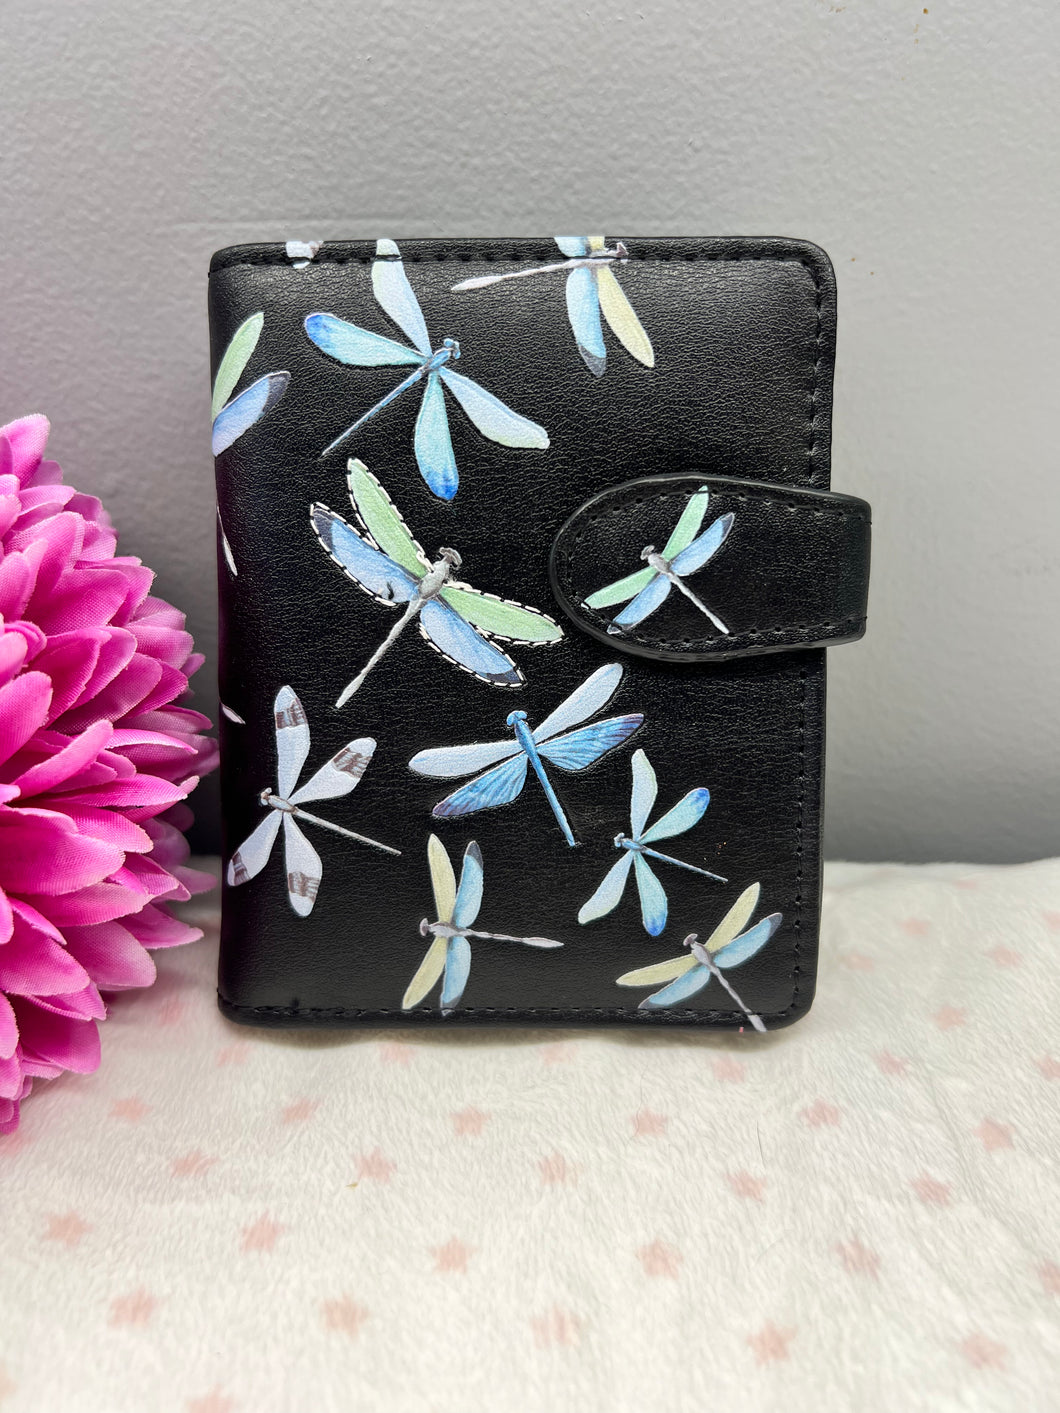 Small Women’s Wallet - Dragonfly Black